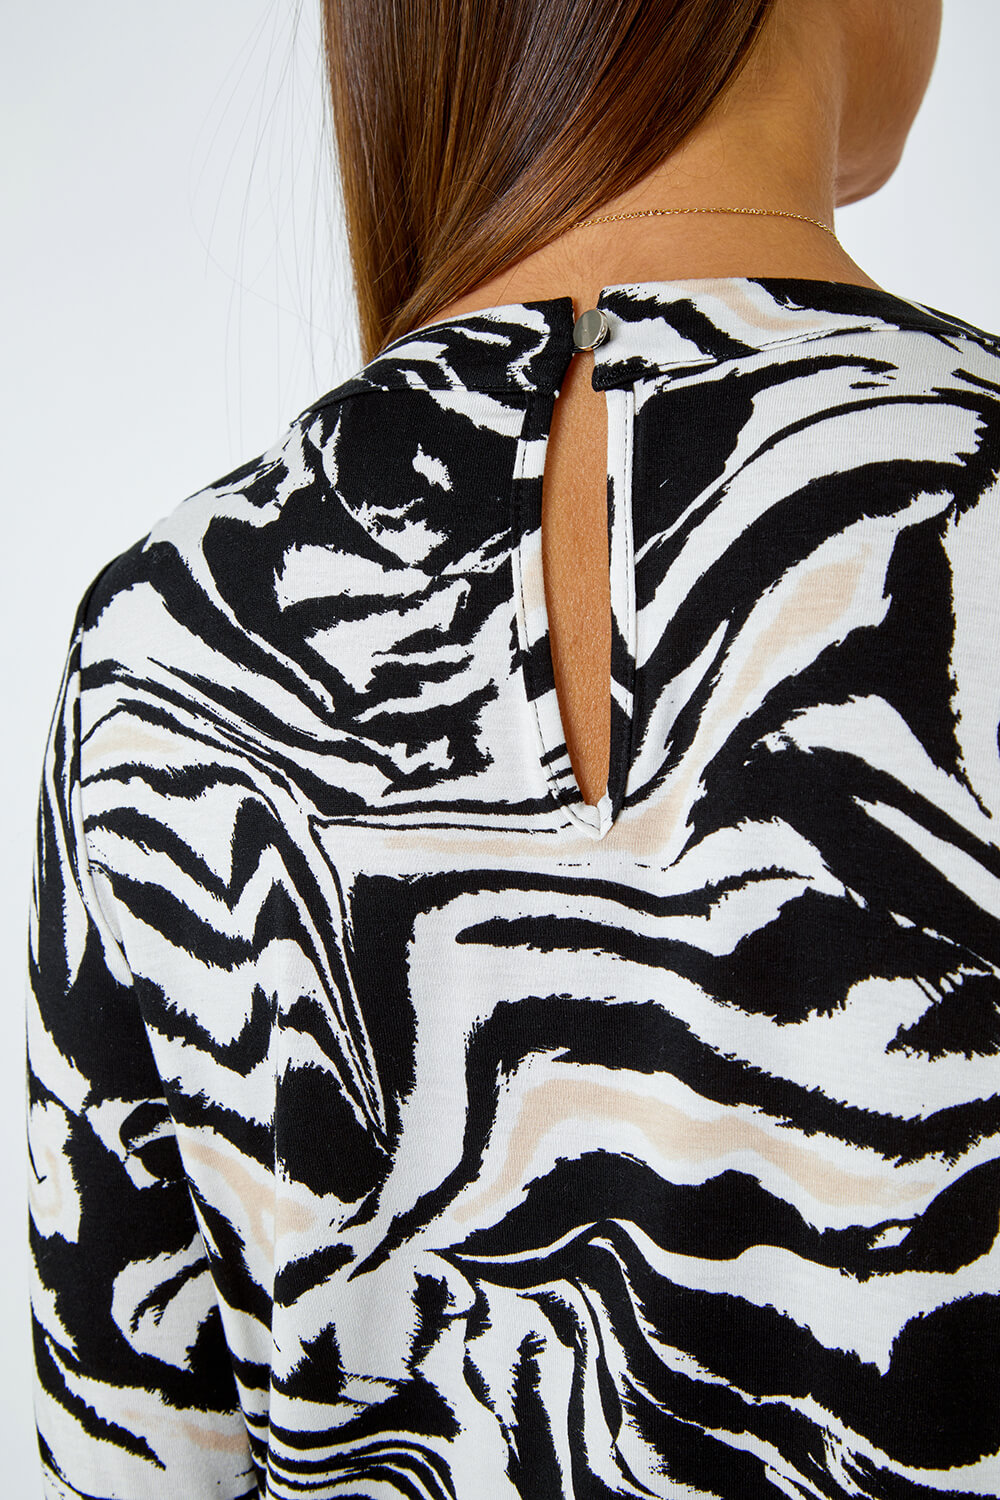 Black Animal Print Pleated Stretch Top, Image 5 of 5